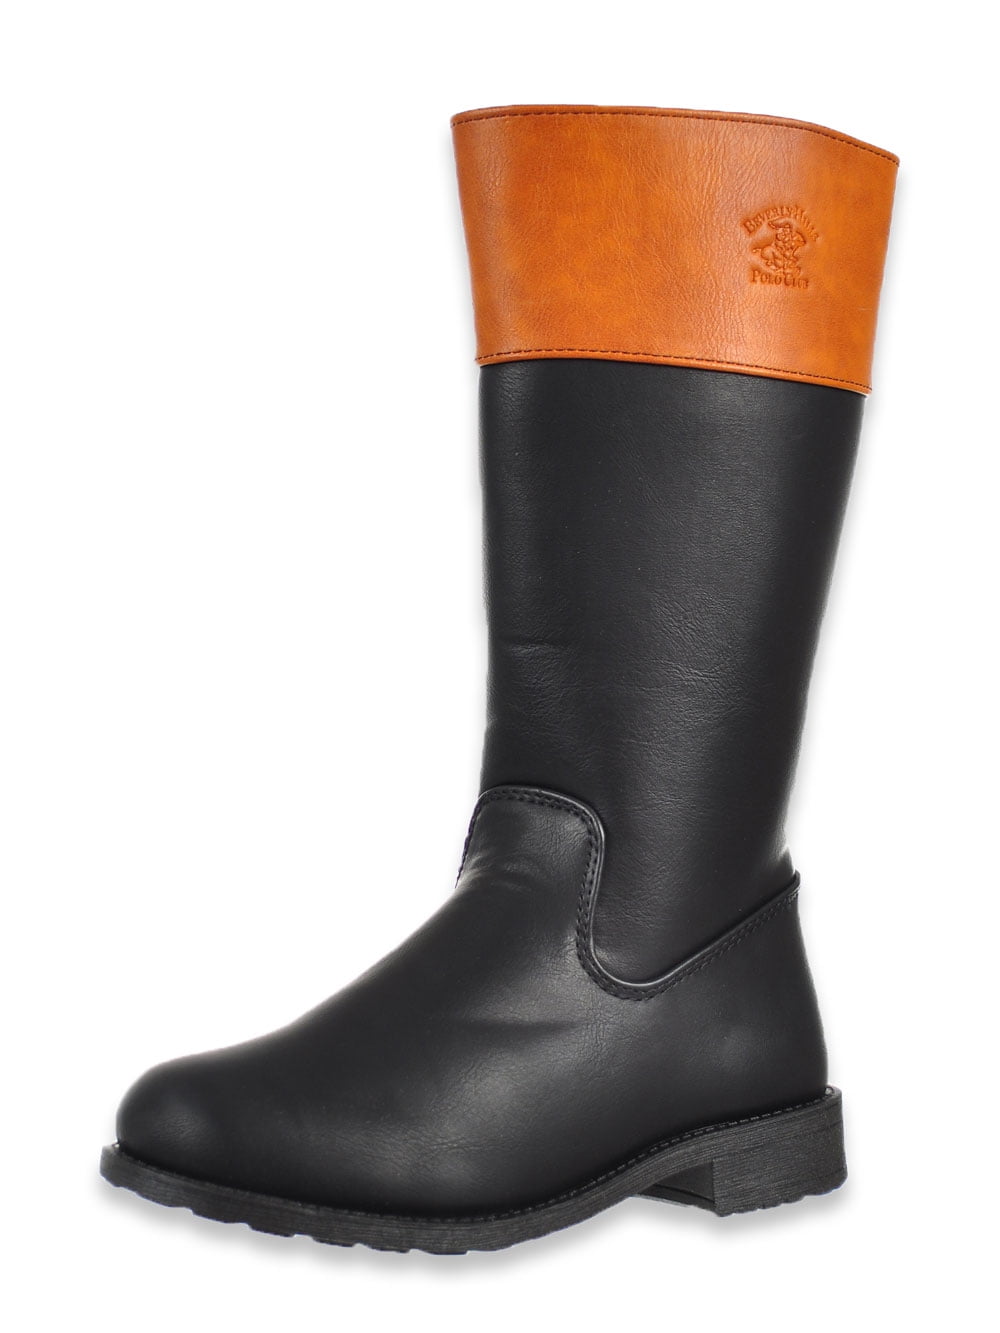 beverly hills polo club boots